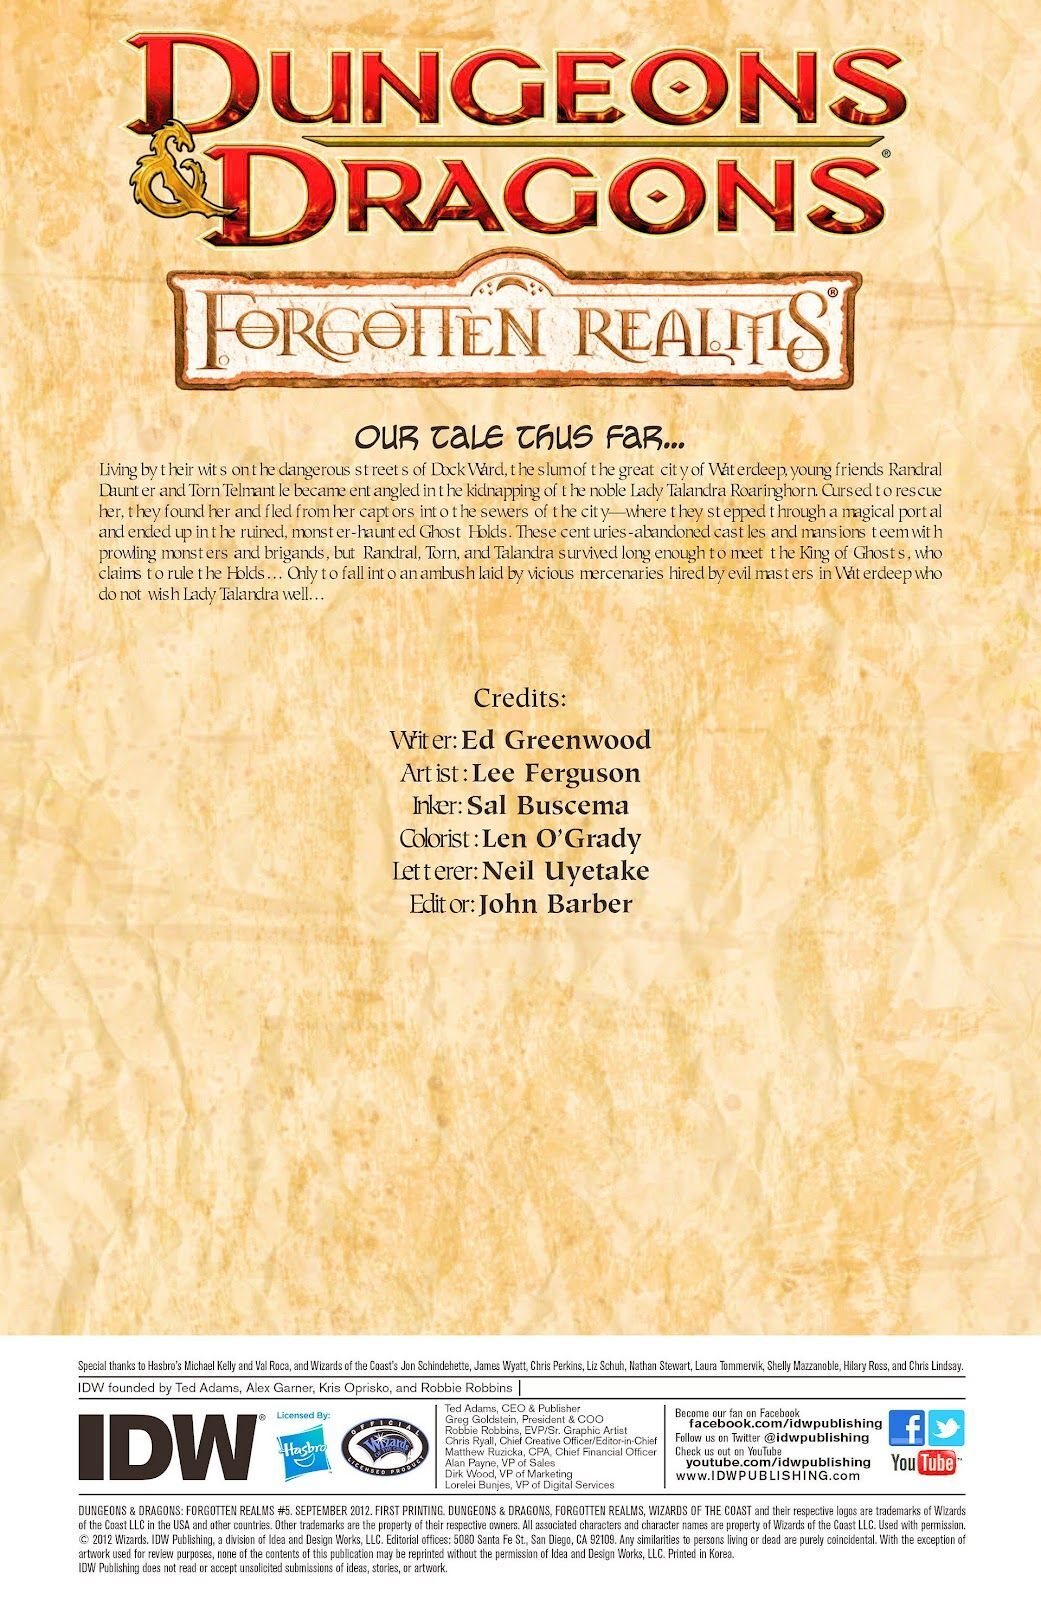 Dungeons and Dragons Forgotten Realms Poster Book [Book]